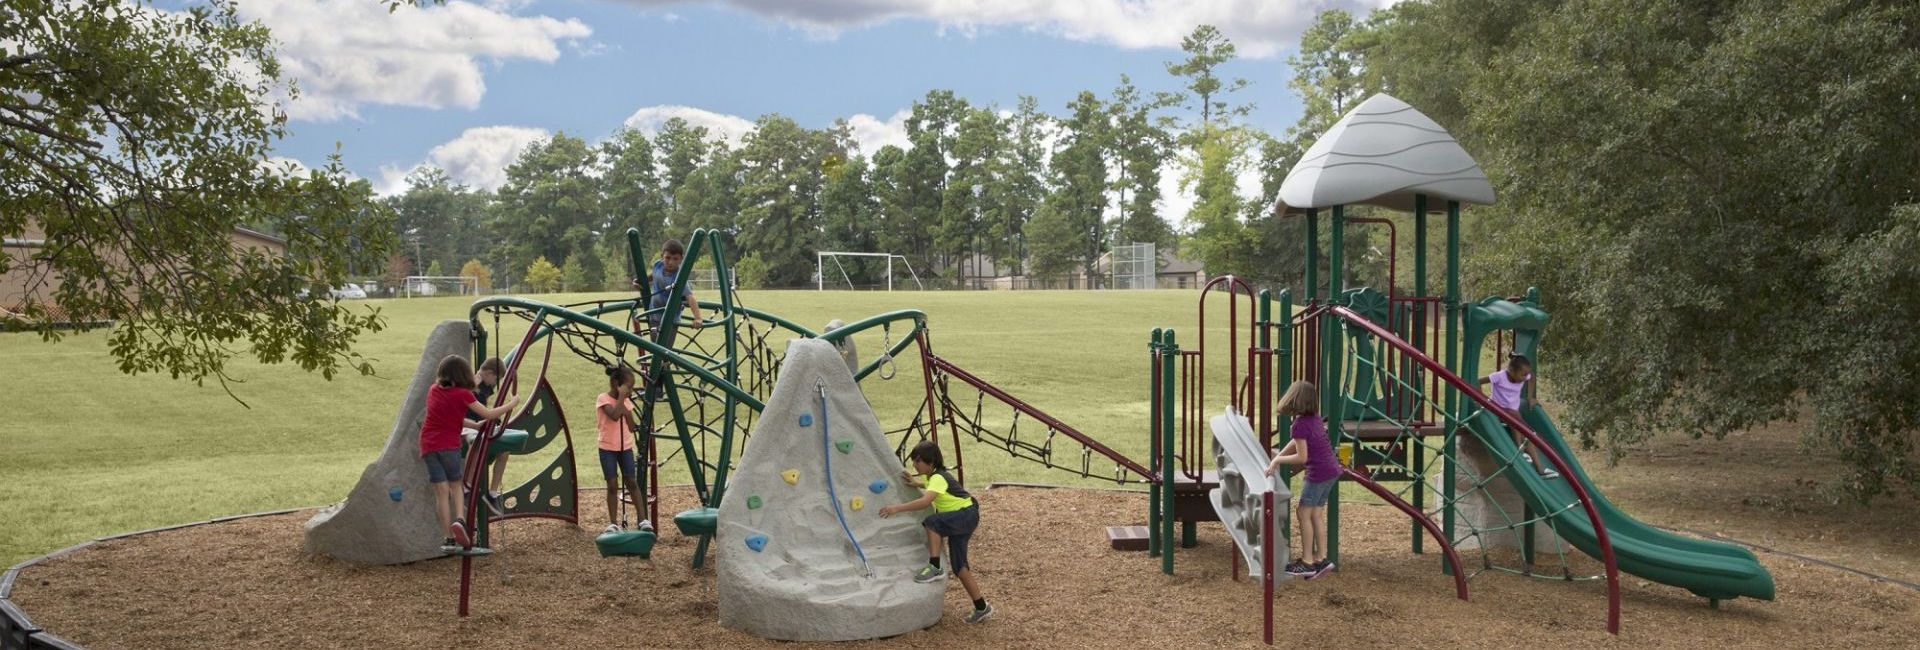 Featured image of children playing at playground with a small gray climbing rock